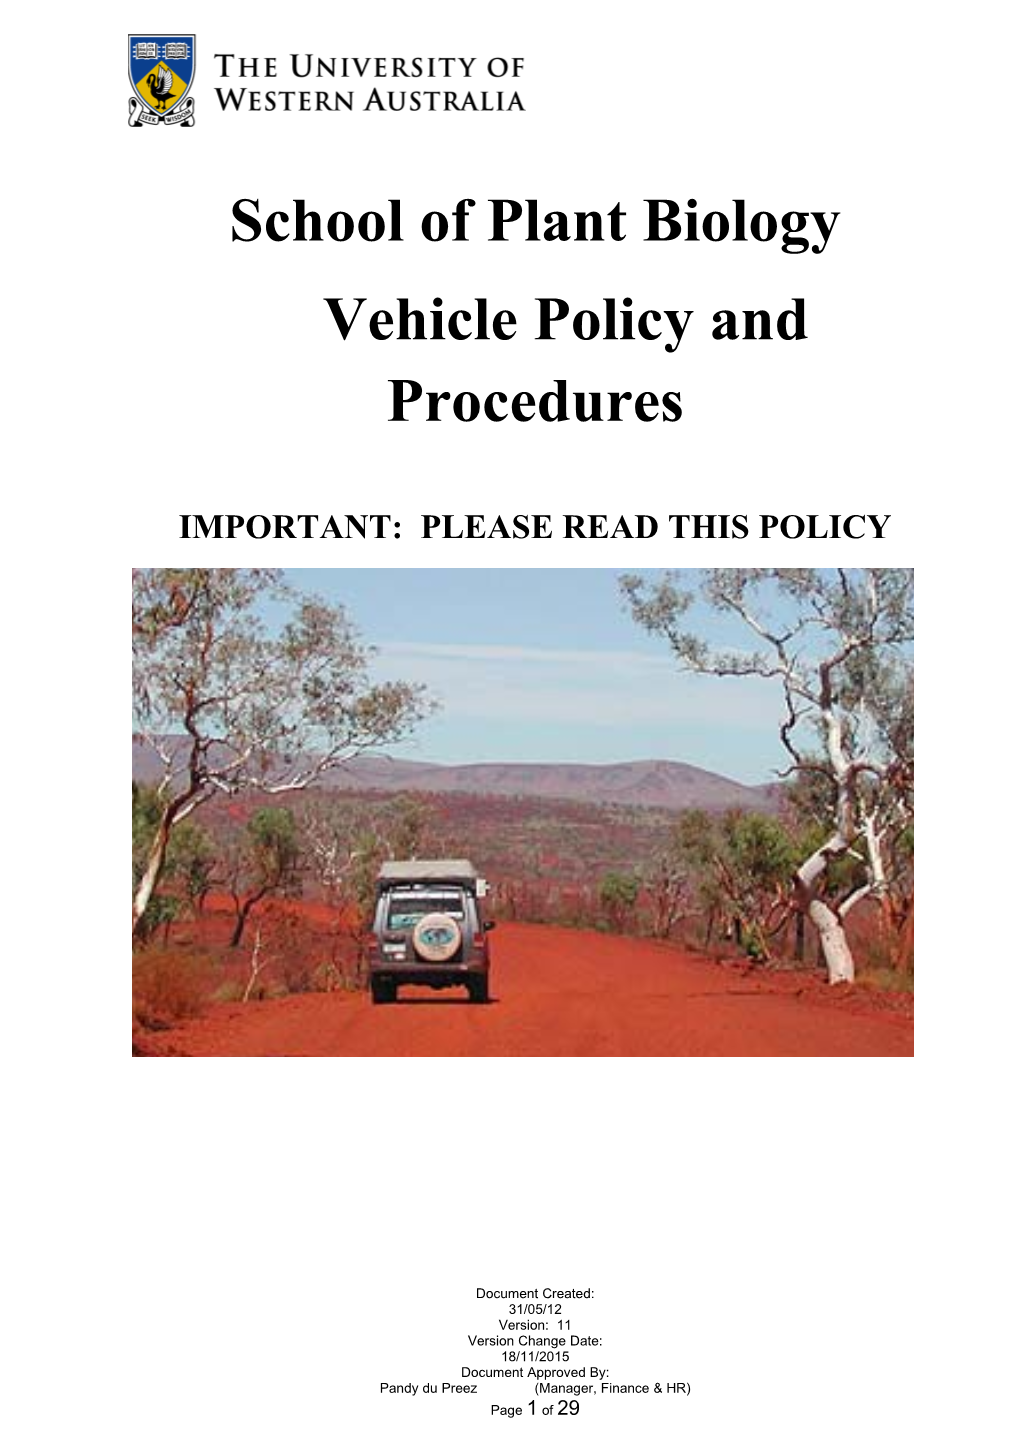 Vehicle Policy and Procedures